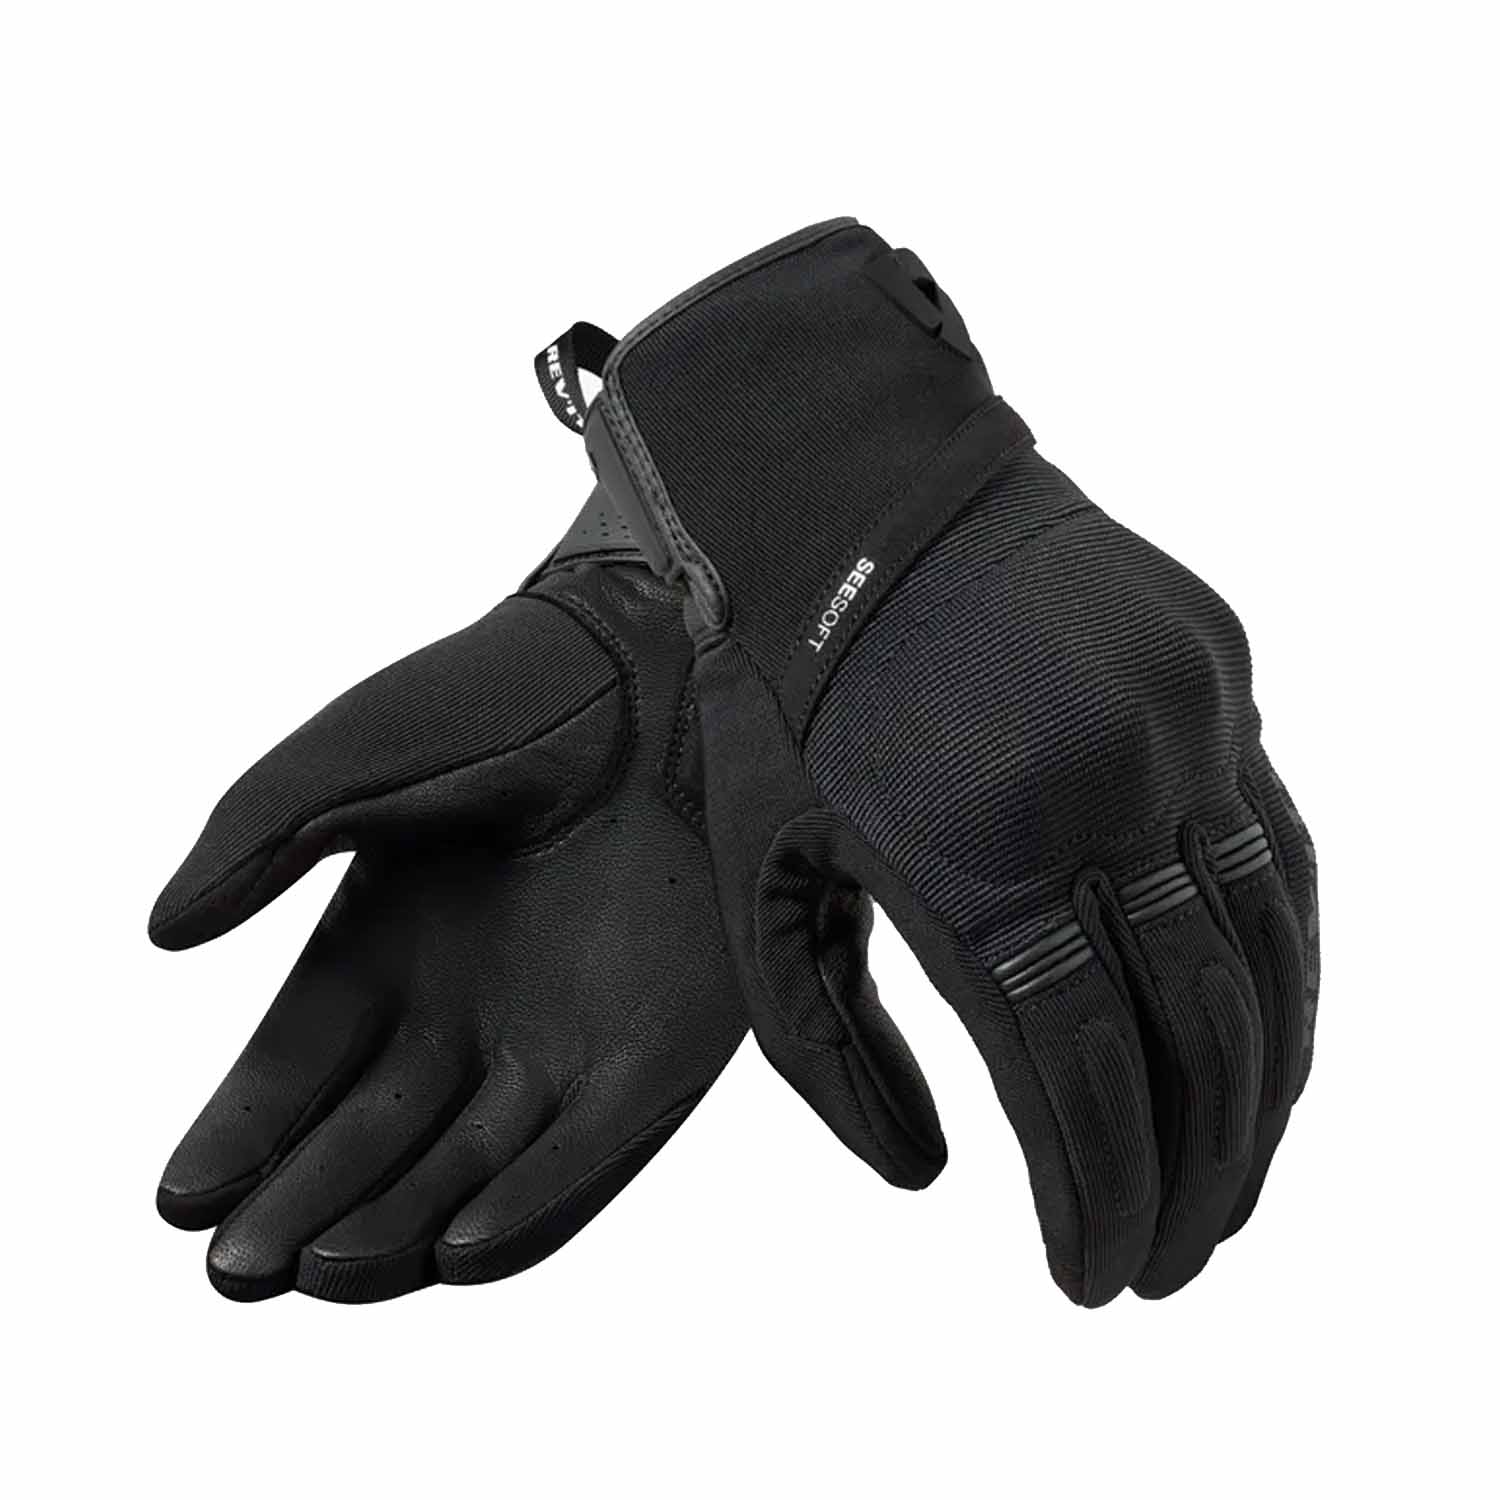 Image of EU REV'IT! Mosca 2 Gloves Black Taille 3XL